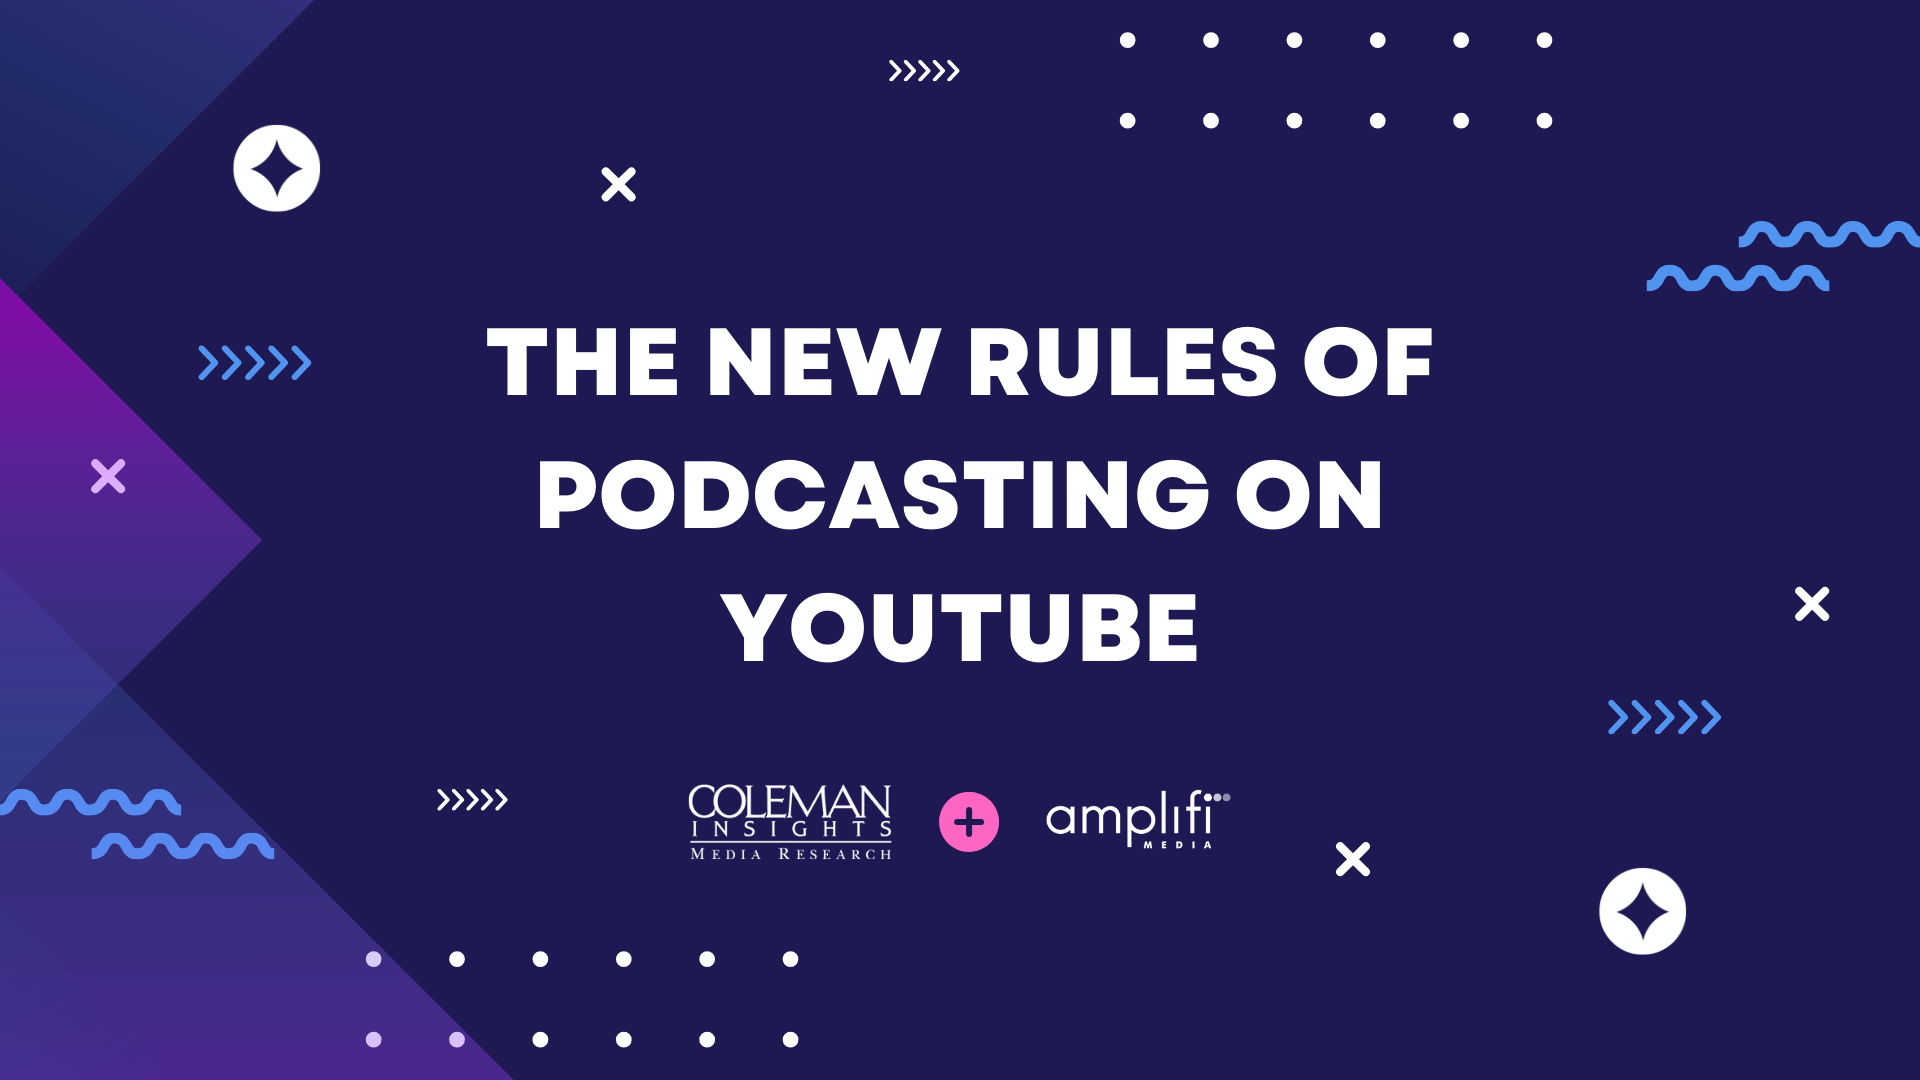 The New Rules of Podcasting on YouTube